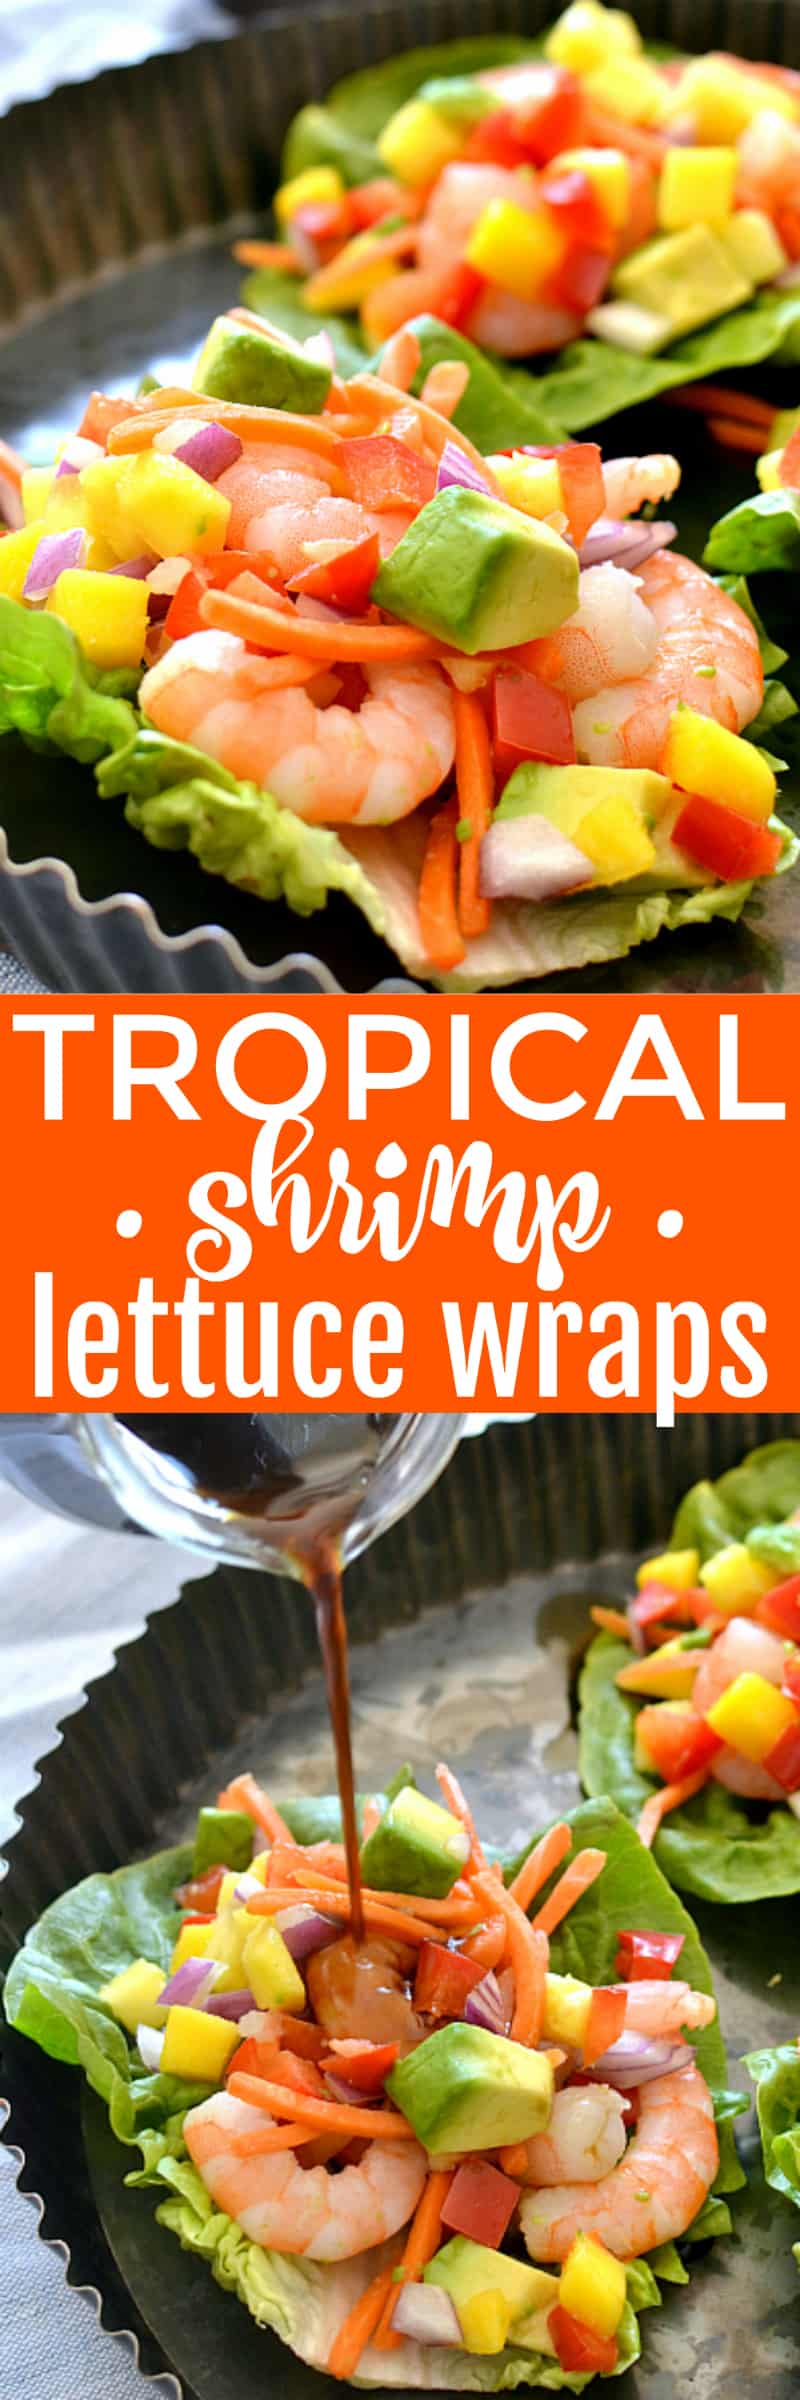 Bright, fresh Tropical Shrimp Lettuce Wraps combine the crunch and flavor of fresh fruits and veggies with the protein power of shrimp with the sweet tang of honey lime soyaki sauce. A deliciously light, refreshing summer meal!